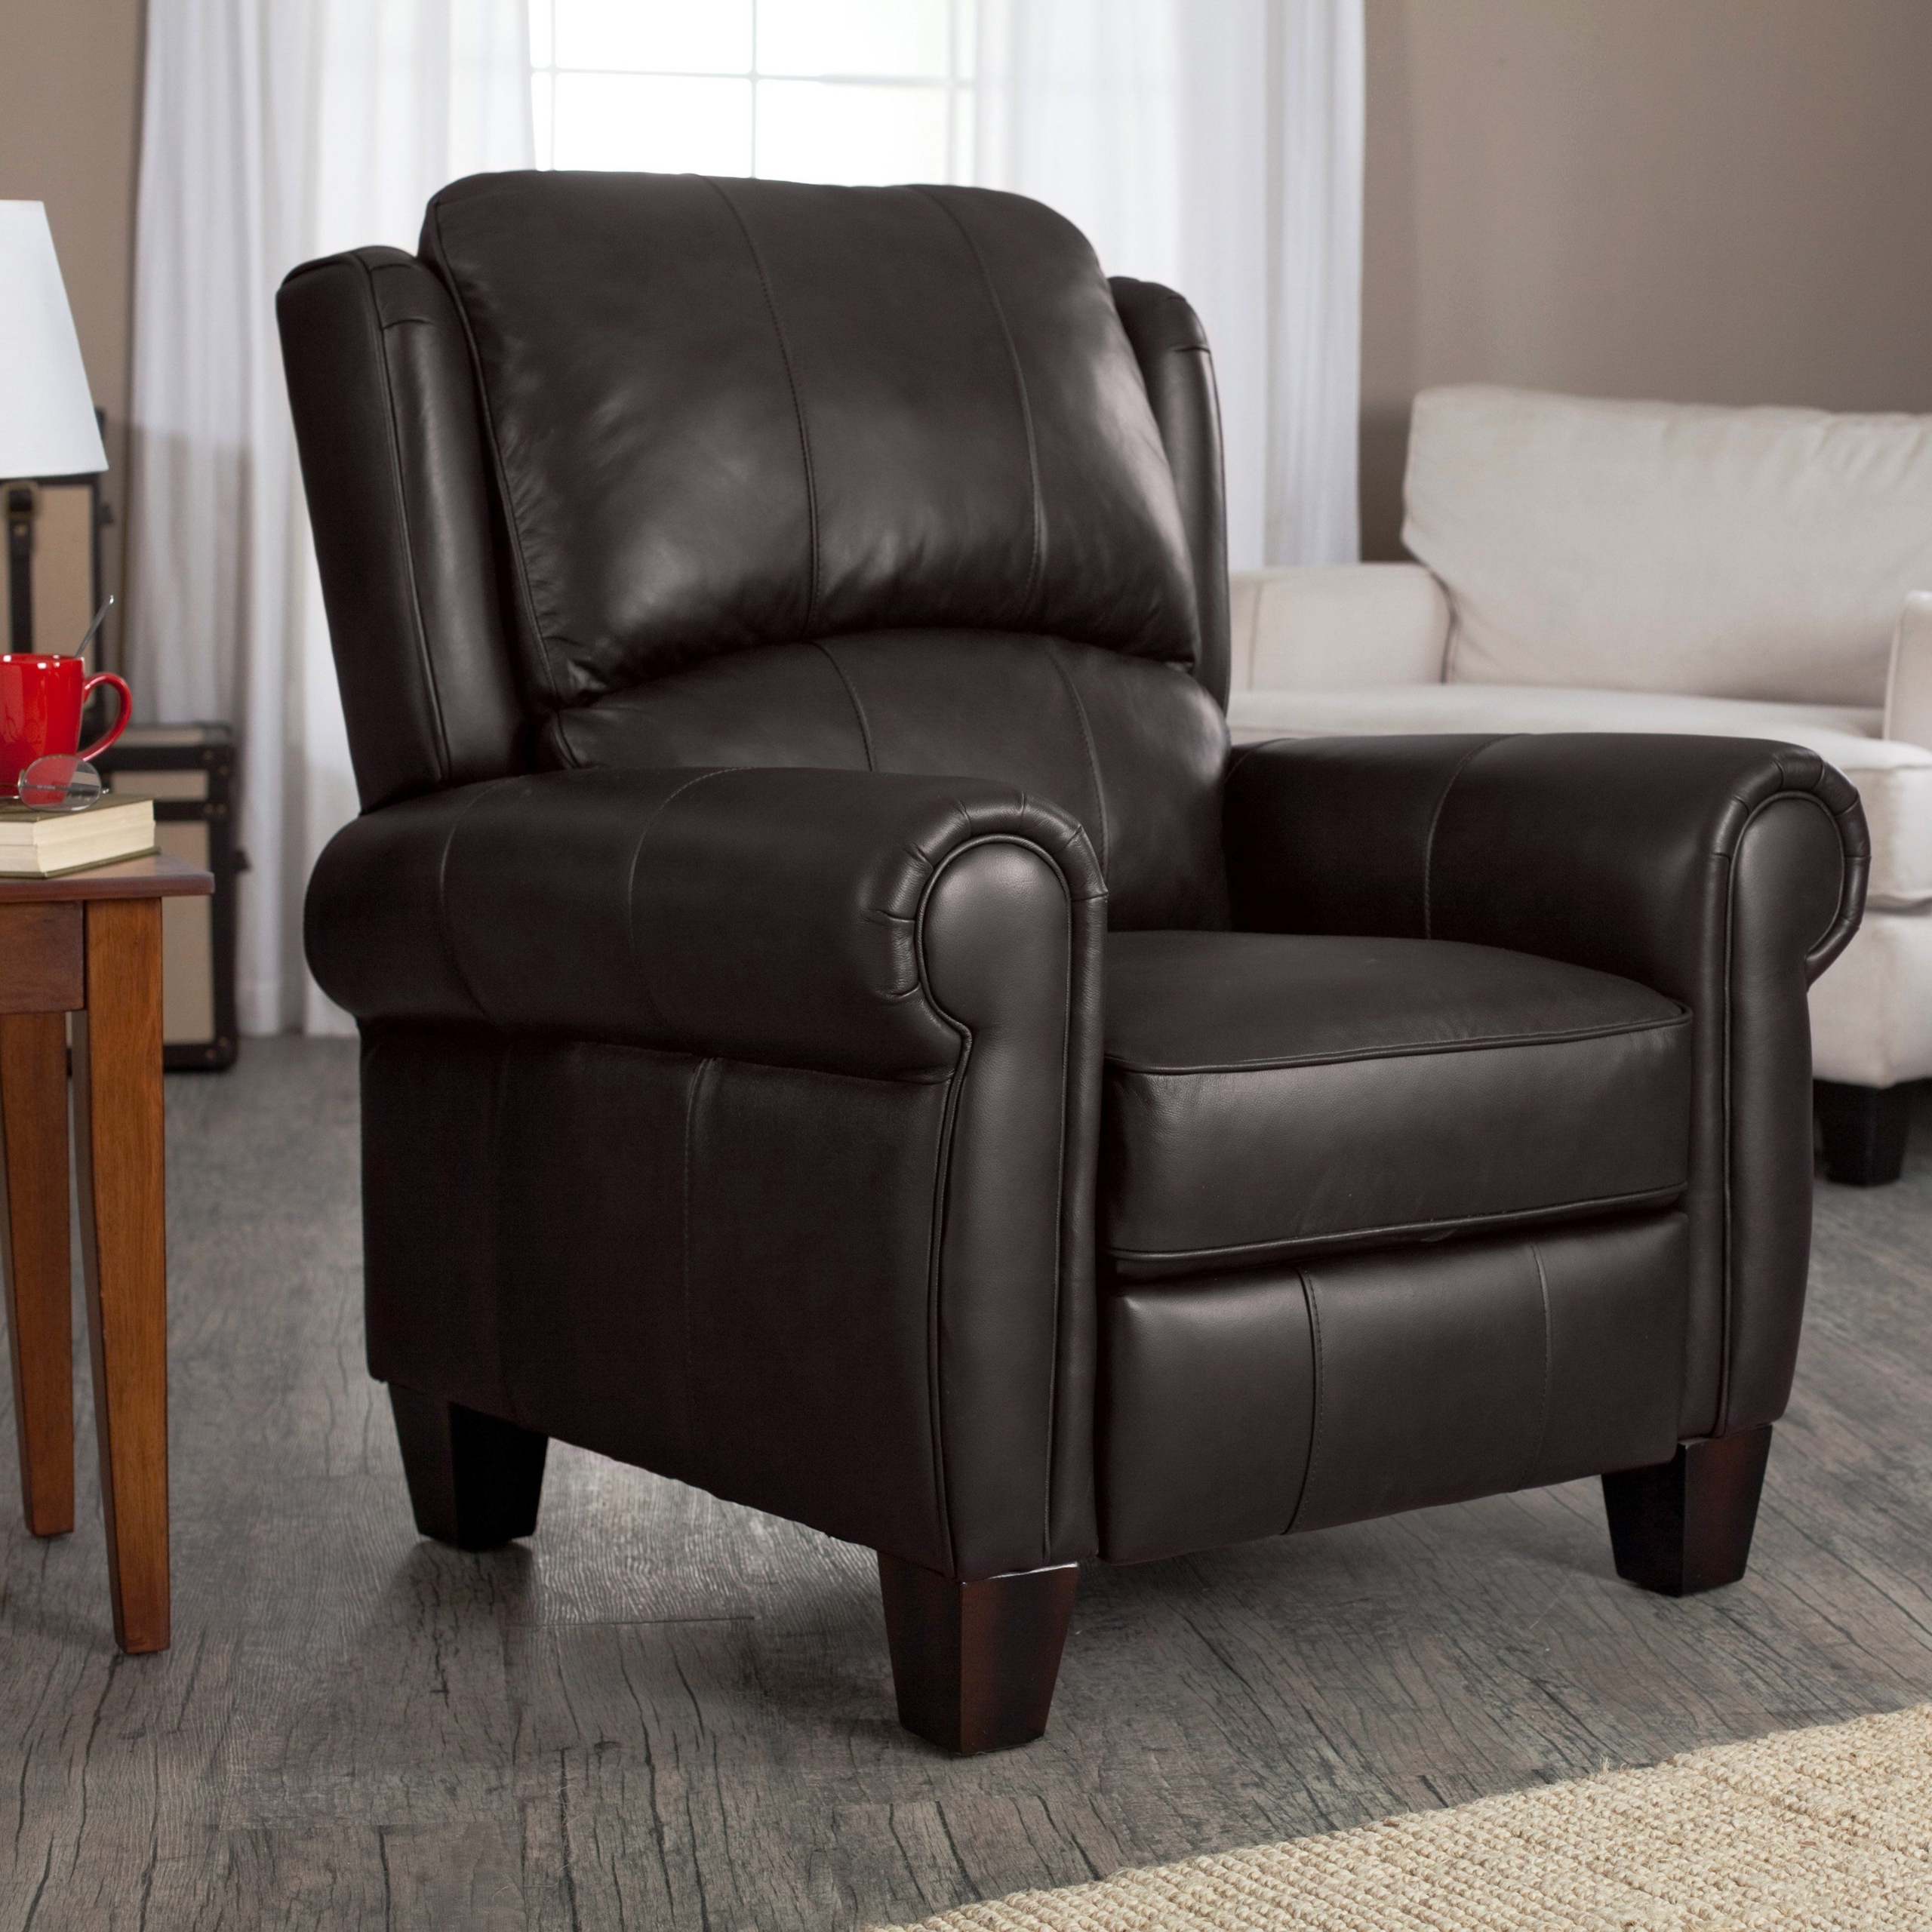 Brown Leather Recliner-Living Room Furniture-Barcalounger Office Chair Recliners Charleston Wingback-Buy Today